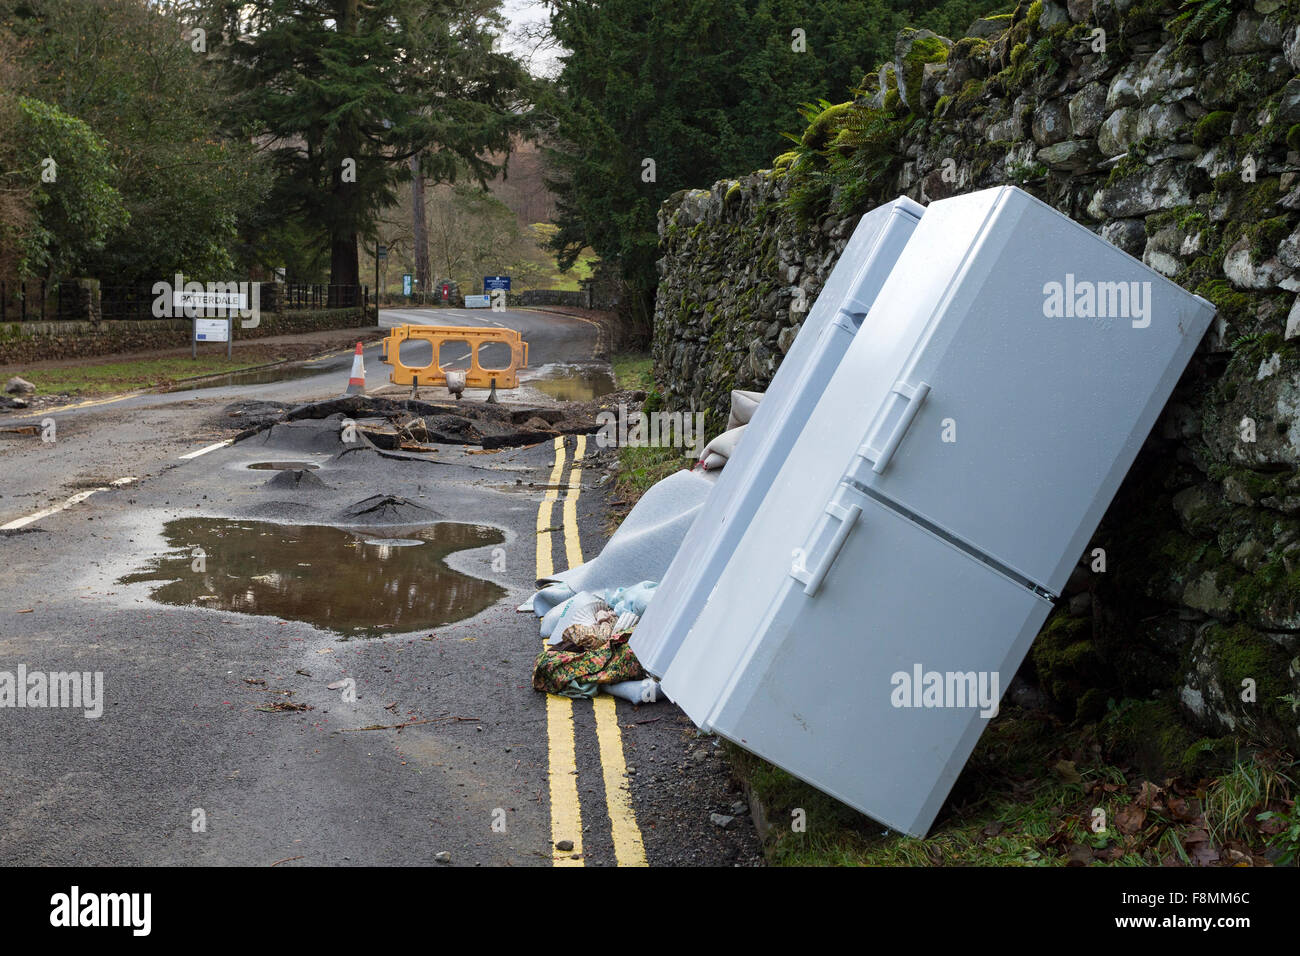 Glenridding, Cumbria, 10th December 2015. UK Weather.  Heavy overnight rain caused more flooding as the river running through the village overflowed again.  Rescue services were called in last night to help people to safety as people's possessions including Christmas decorations were washed down the road. Diggers were used this morning to try and dredge debris from the river in a bid to prevent further flooding.  In nearby Patterdale evidence of the power of the water from Storm Desmond could also be seen where floodwater had burst through the road surface. Credit:  David Forster/Alamy Live Ne Stock Photo